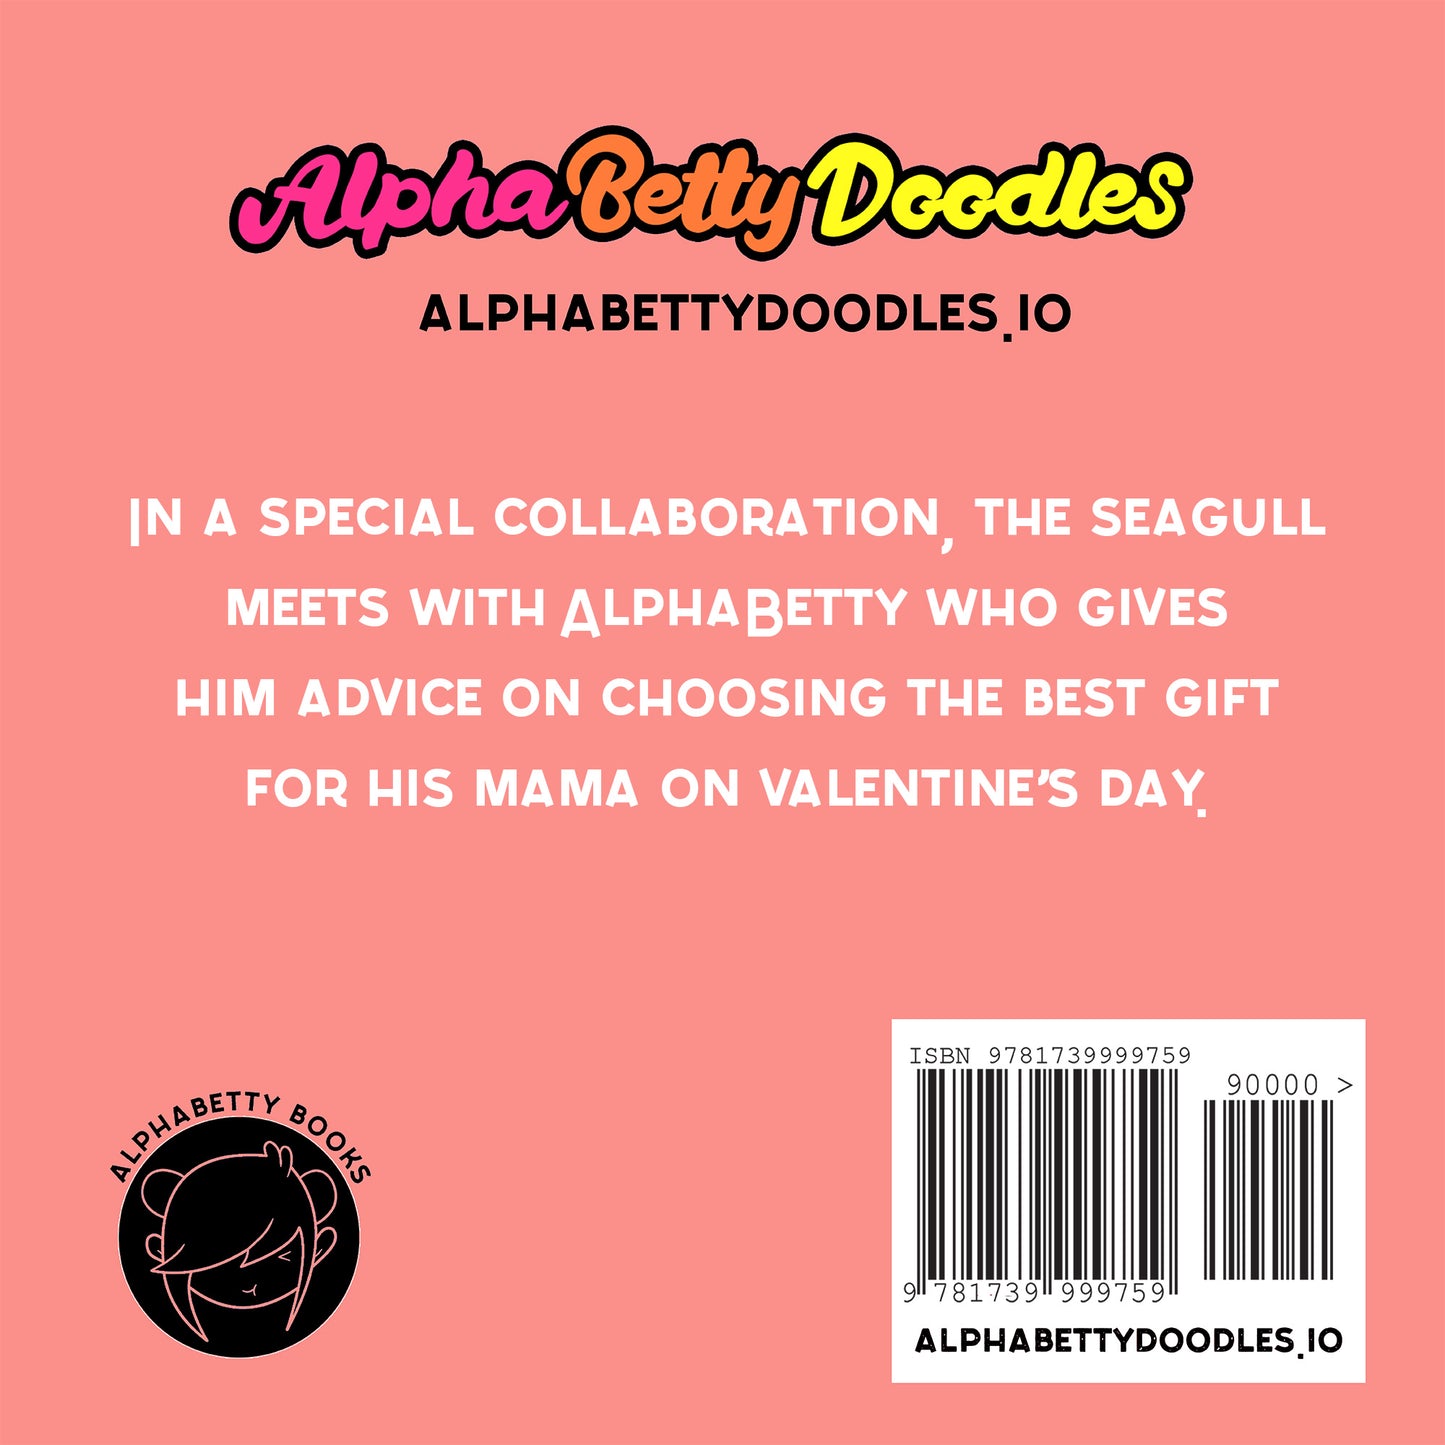 AlphaBetty Doodles: The Seagull & The Valentine's Gift